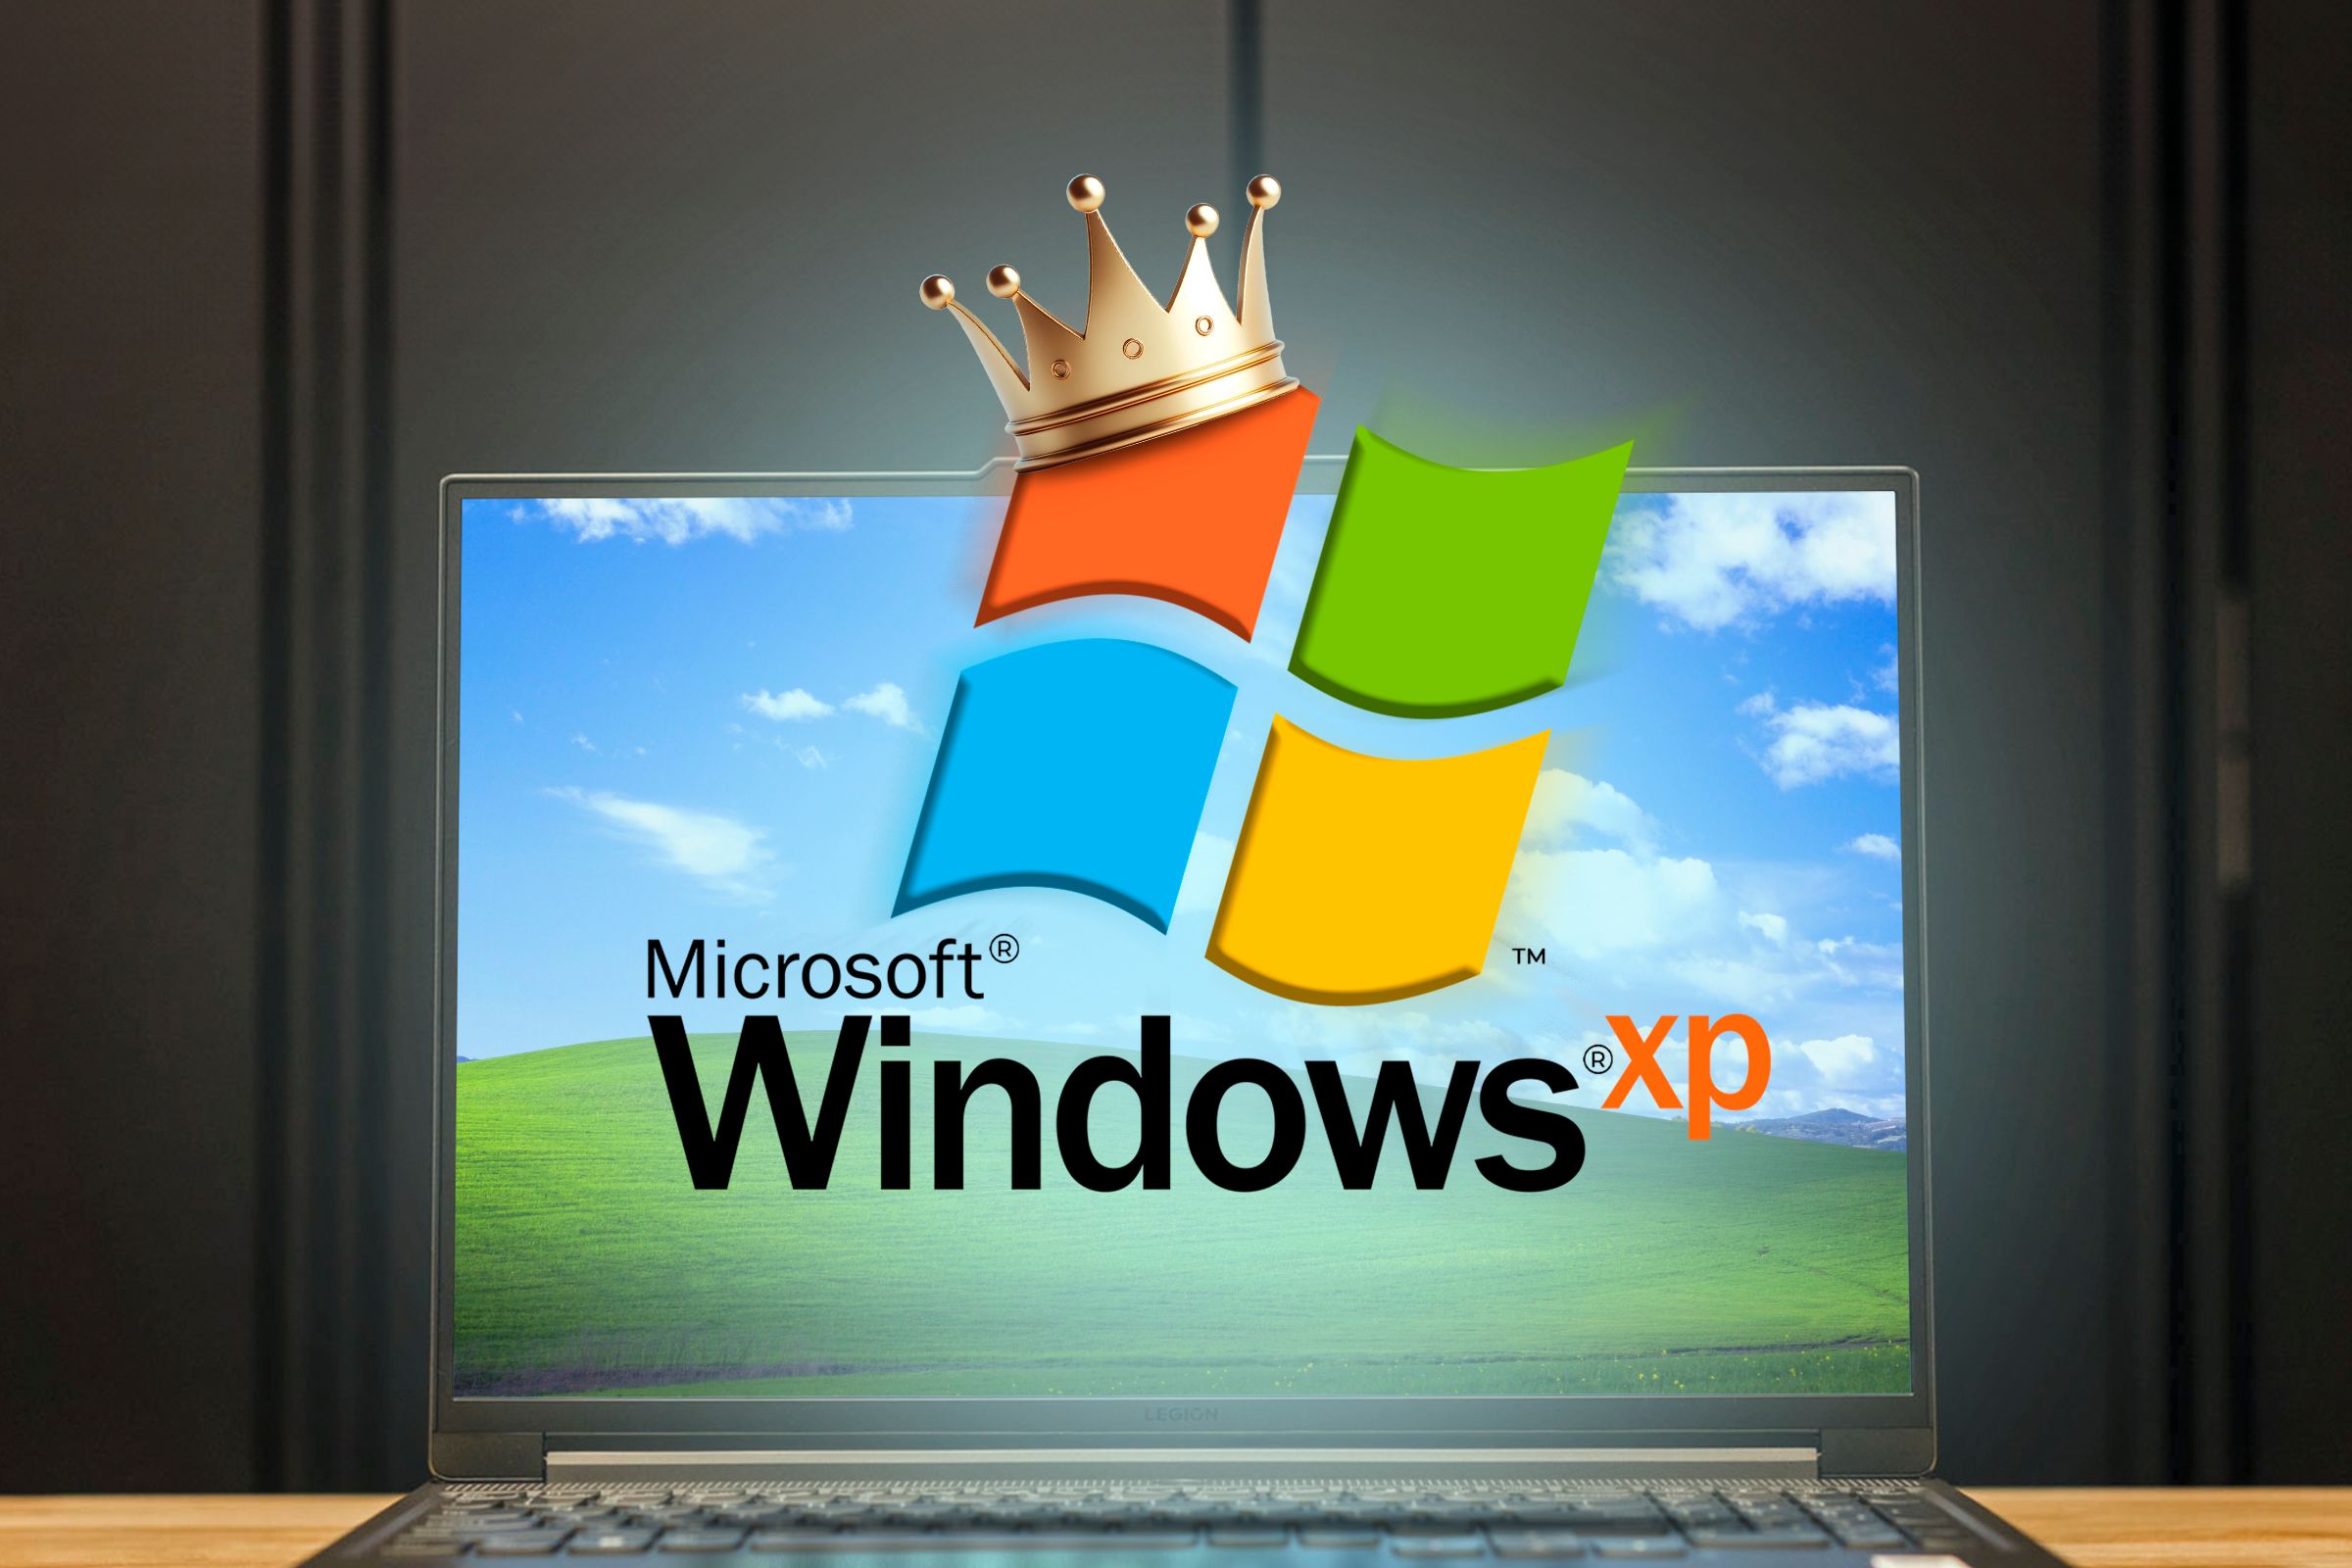 Laptop with the default Windows XP wallpaper and the Windows XP logo with a crown in the center.